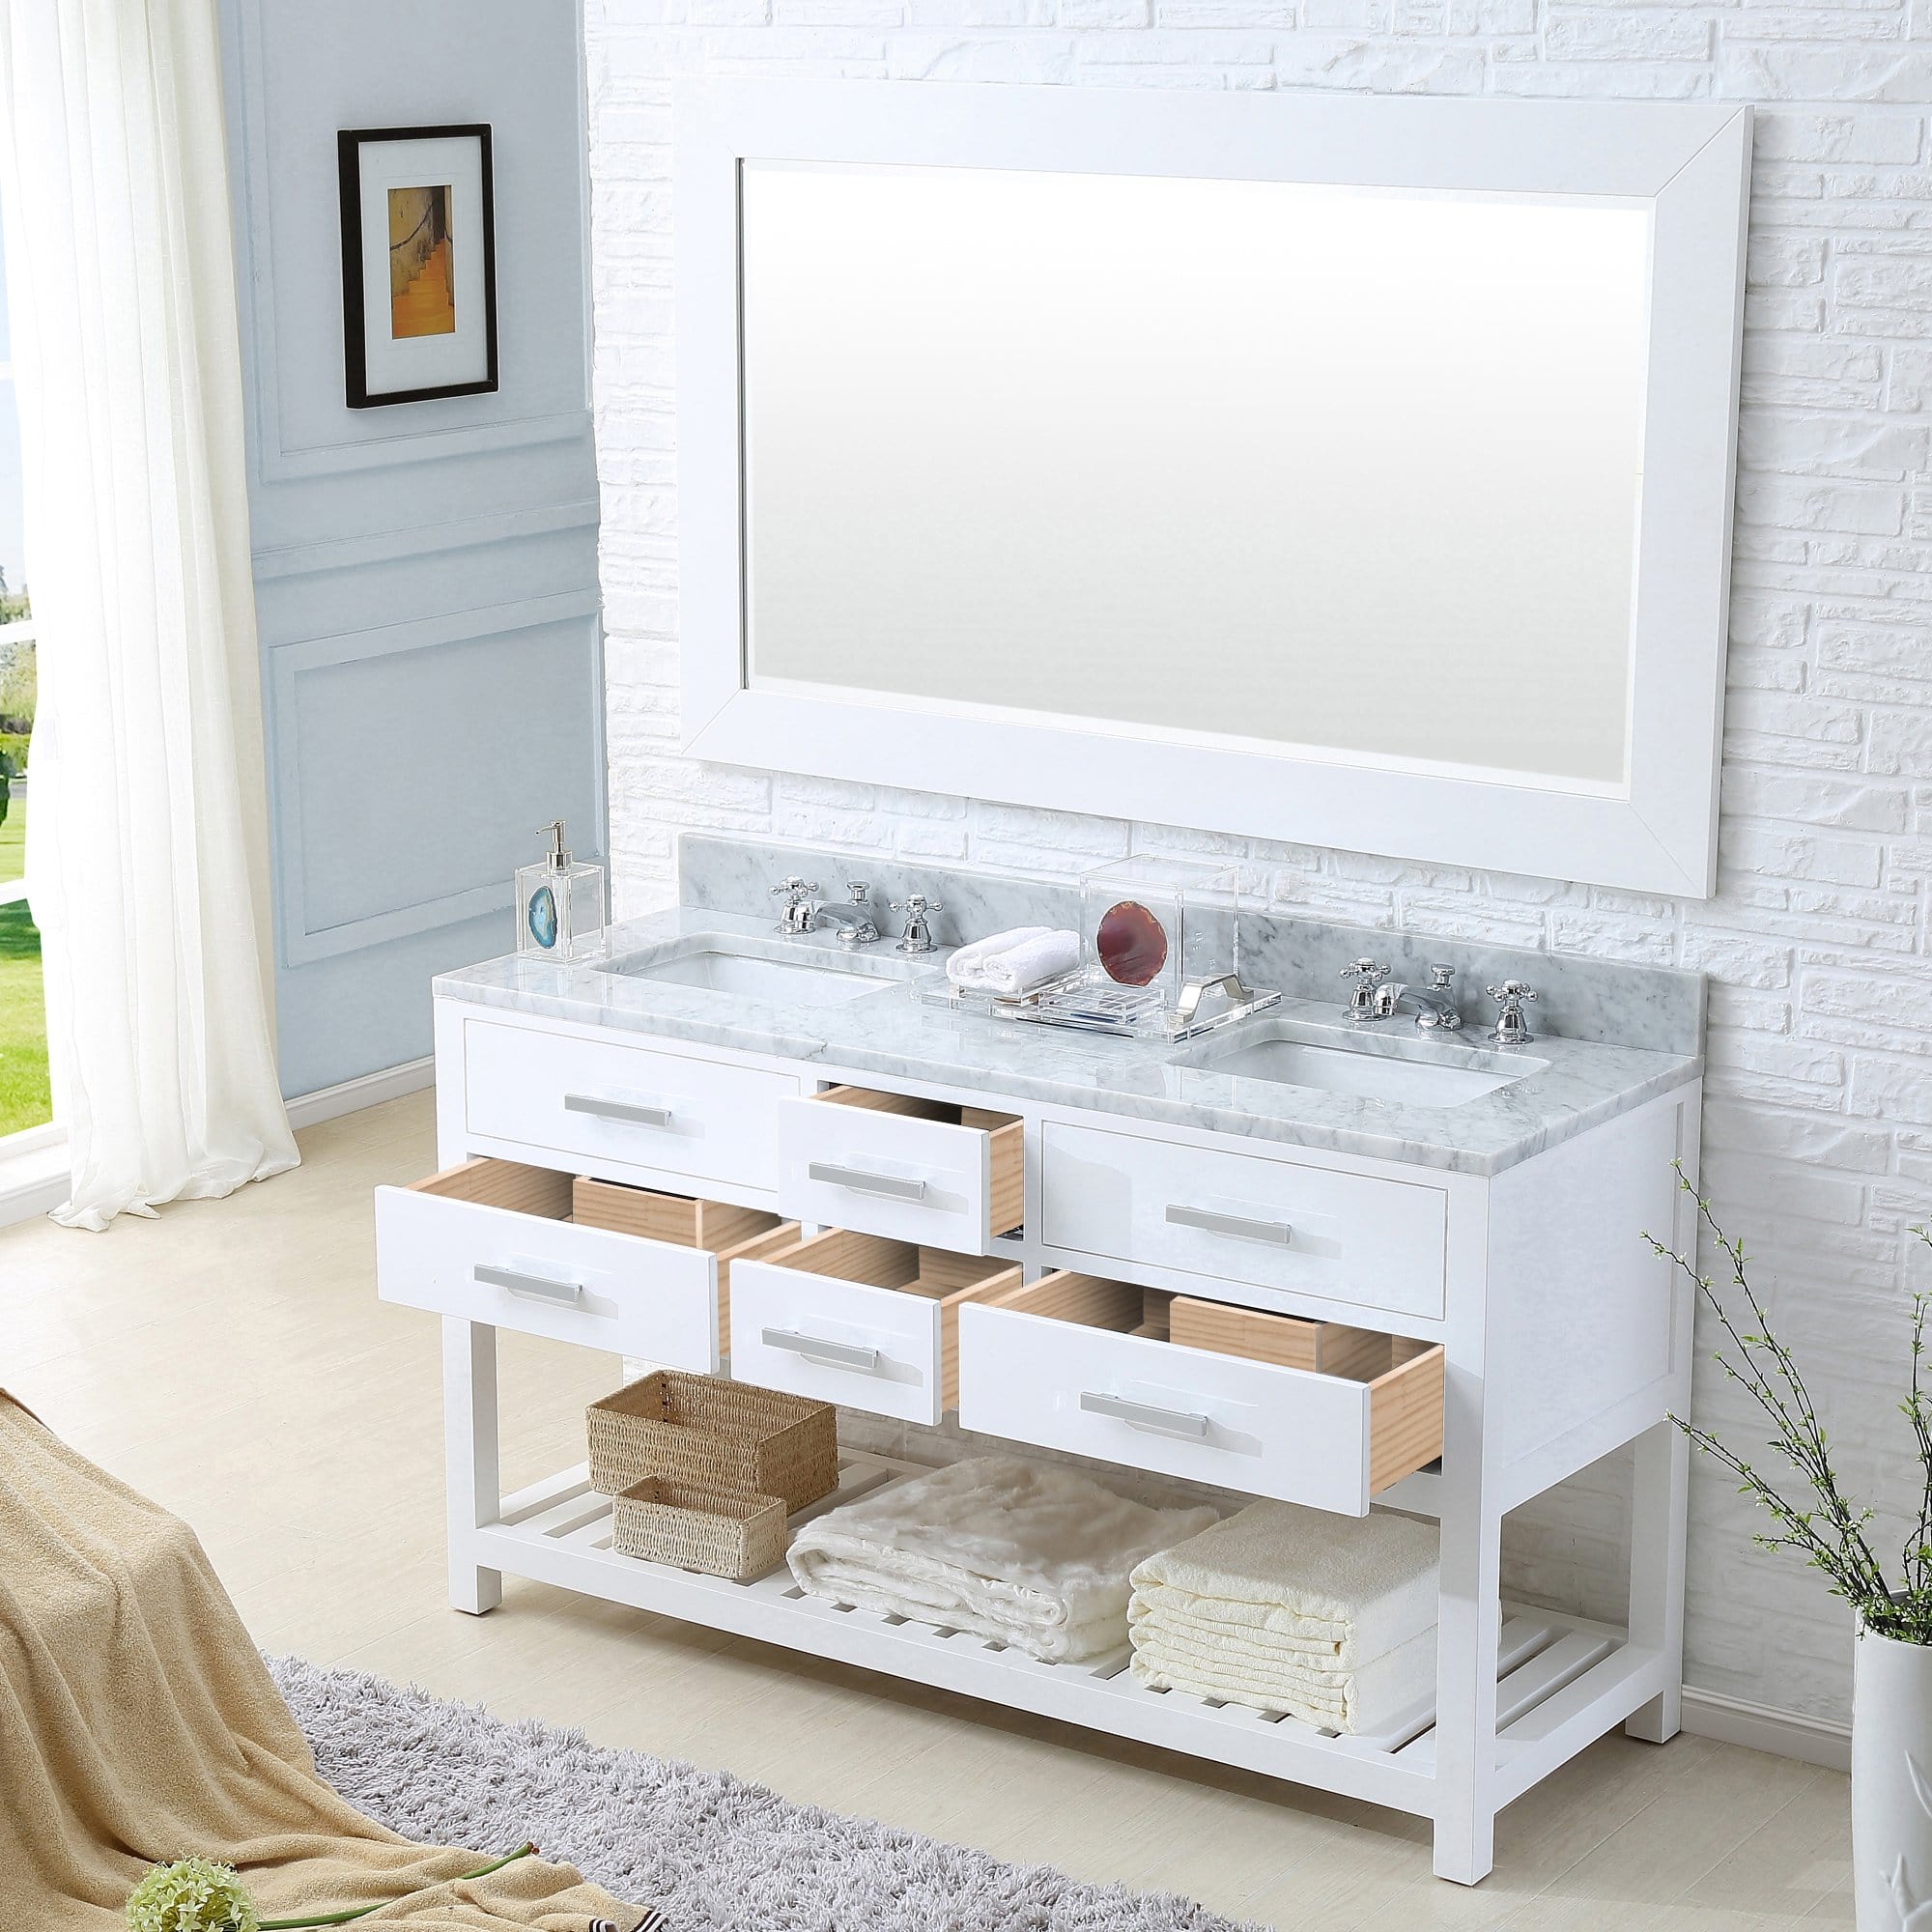 Water Creation 60 Inch Pure White Double Sink Bathroom Vanity From The Madalyn Collection - Molaix700621682493Bathroom vanityMA60CW01PW-000000000